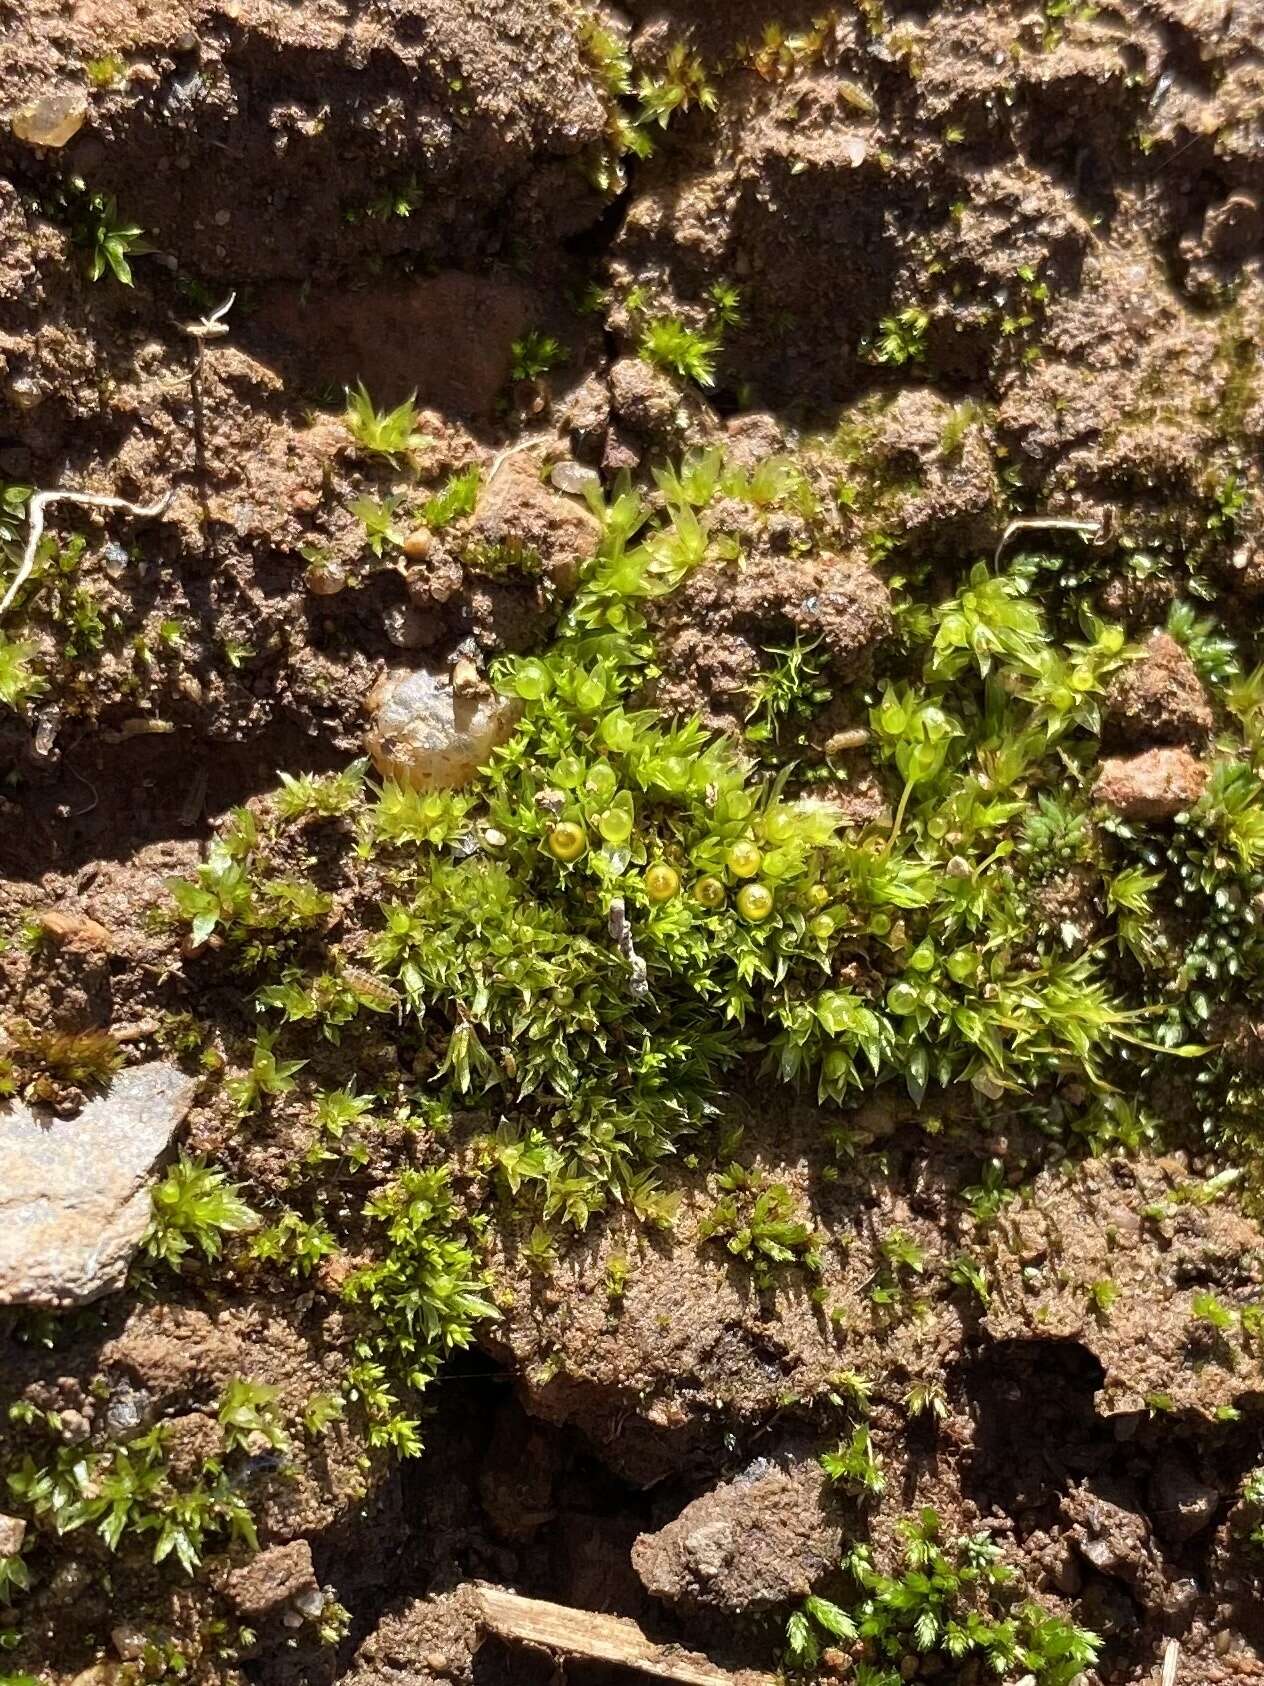 Image of immersed physcomitrium moss